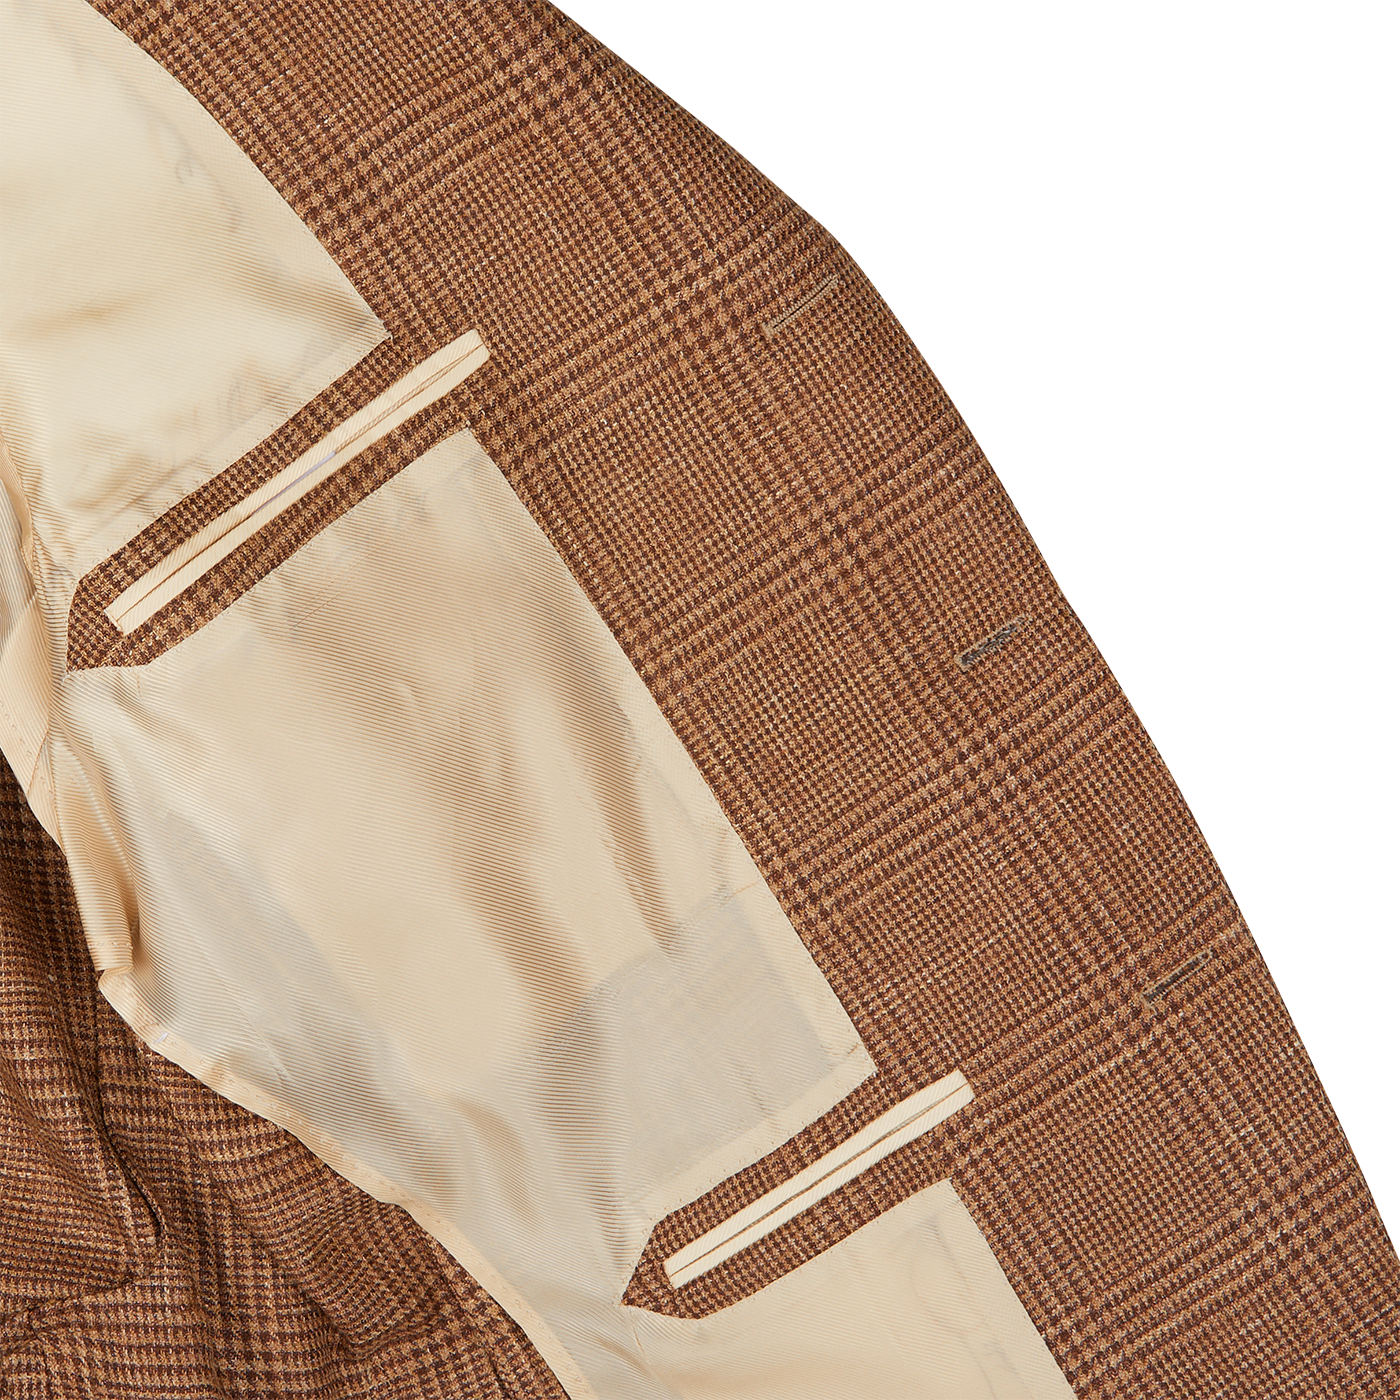 Detail of a De Petrillo Brown Checked Wool Silk Linen Posillipo Blazer with white lining and pocket trim on a patterned background, showcasing exquisite tailoring skills.